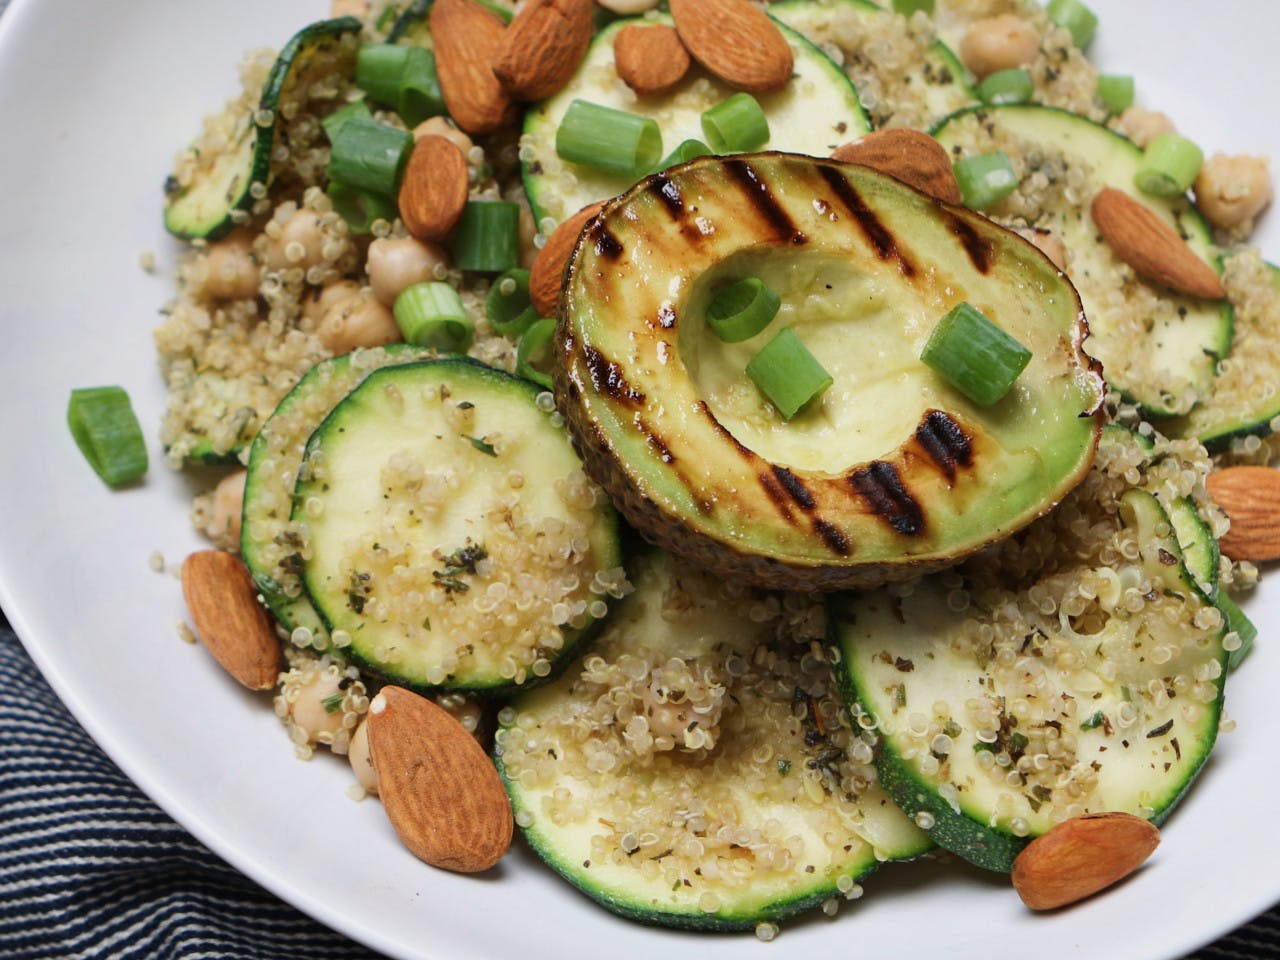 Spicy quinoa with grilled avocado